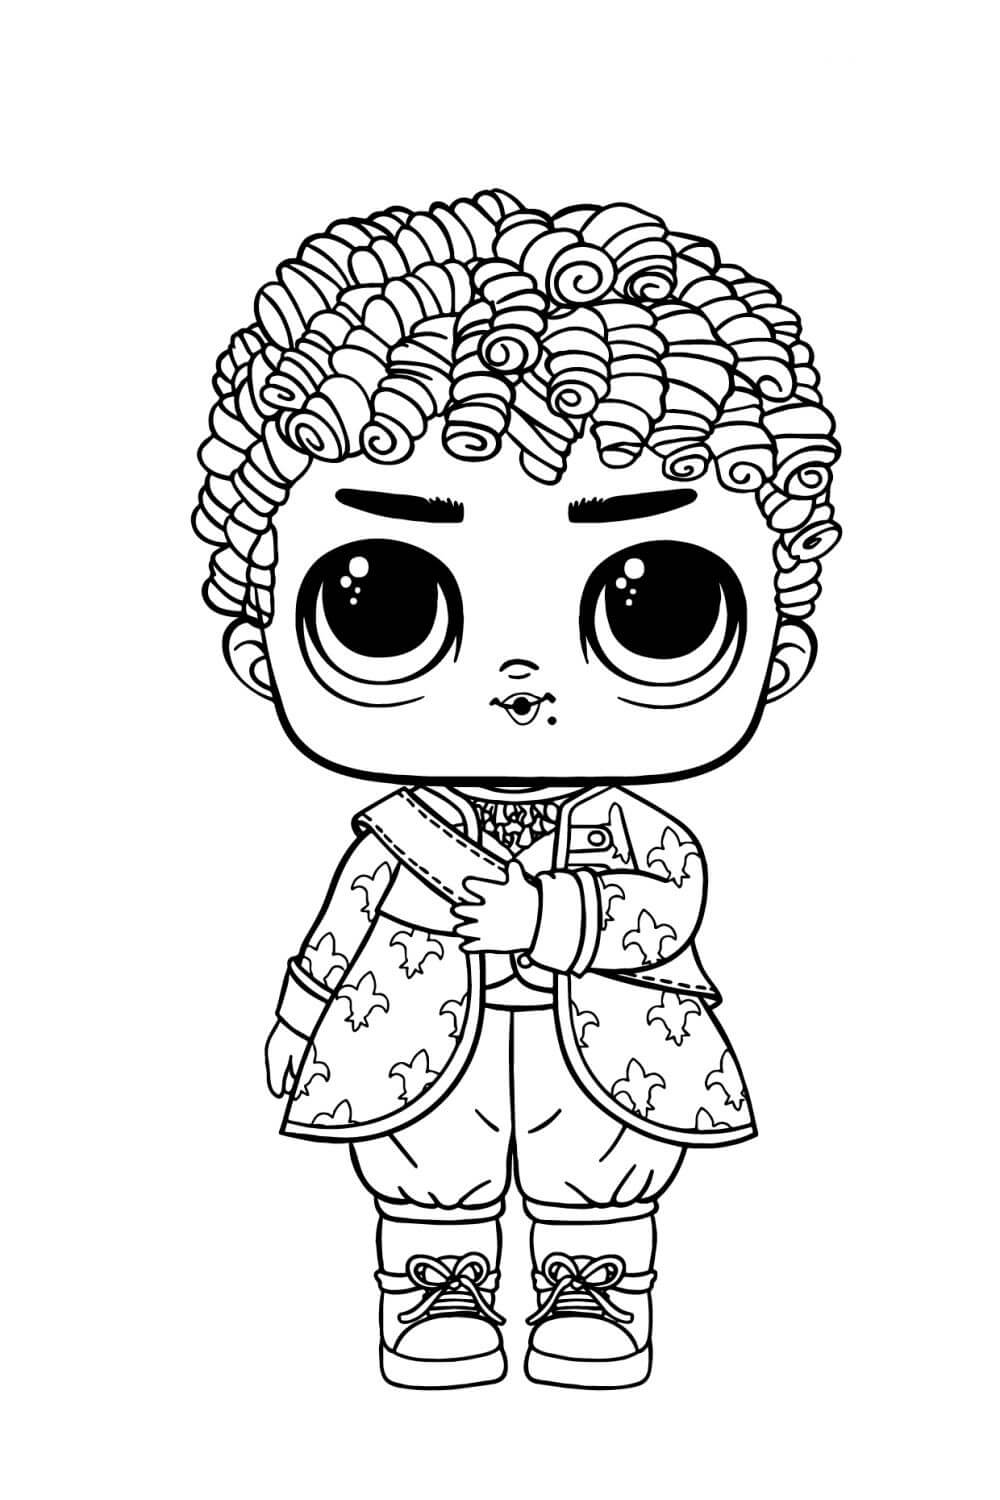 Baby Boy LOL Boys Coloring Page - Free Printable Coloring Pages for Kids